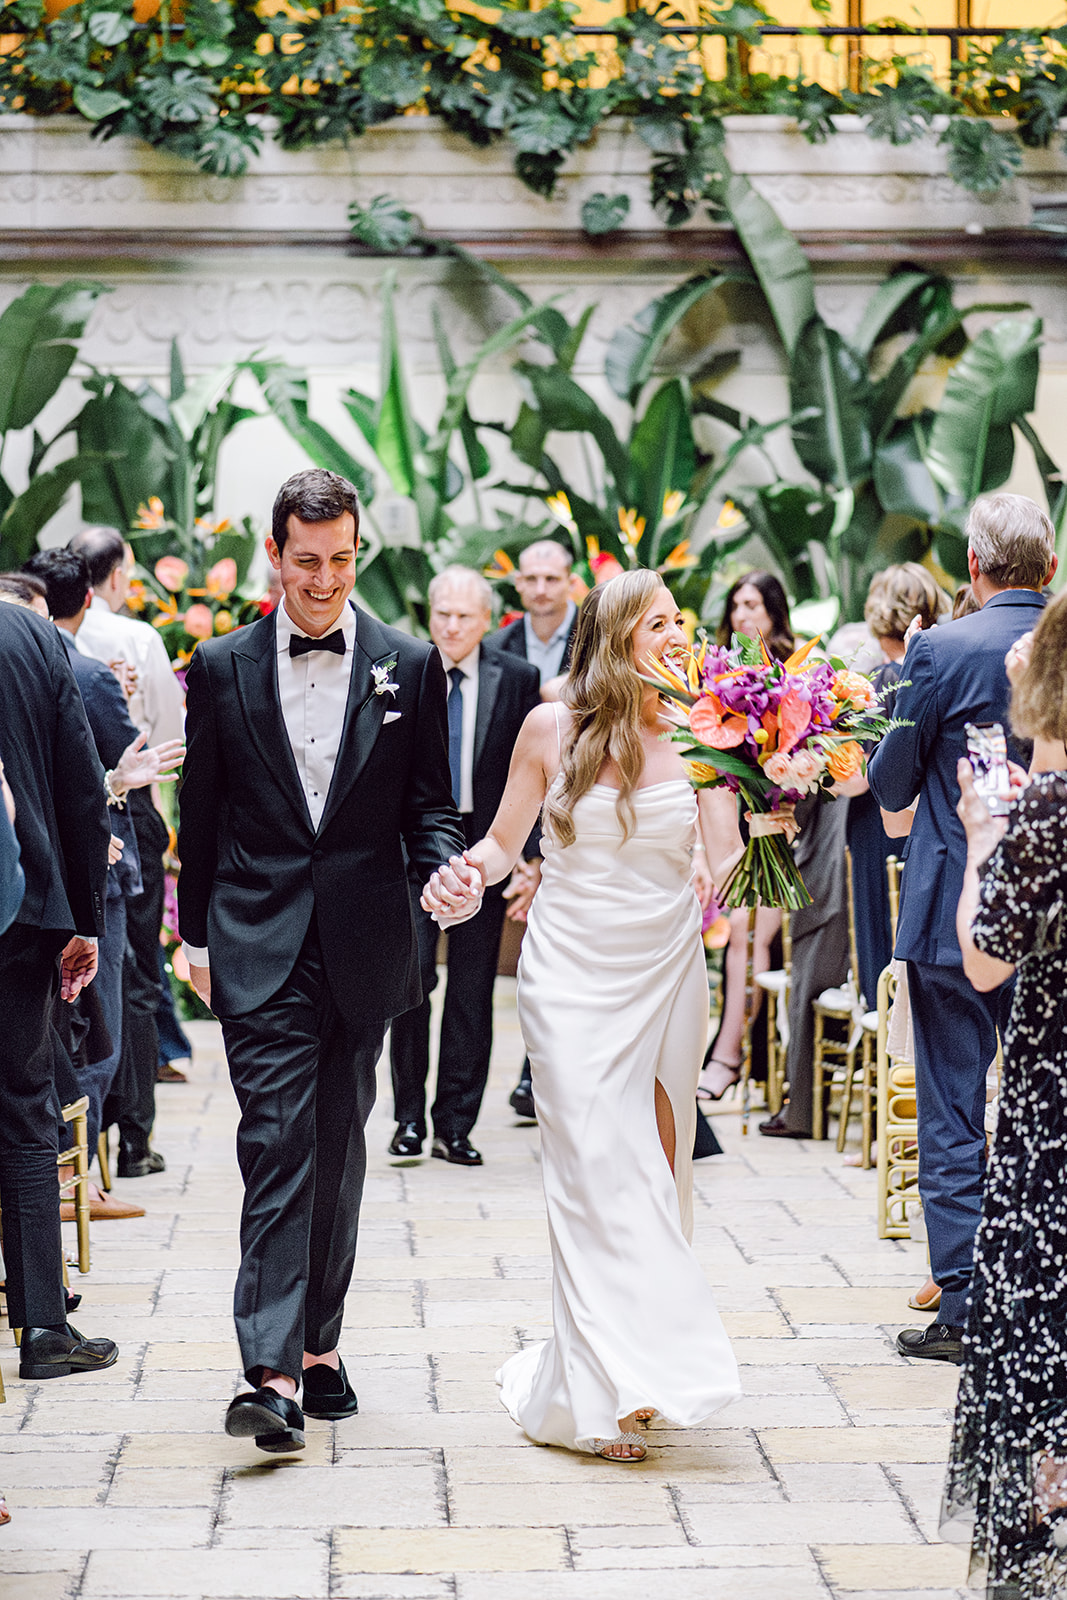 Bride and groom recessional at ceremony at Mayfair House Hotel & Garden in Miami on wedding day.